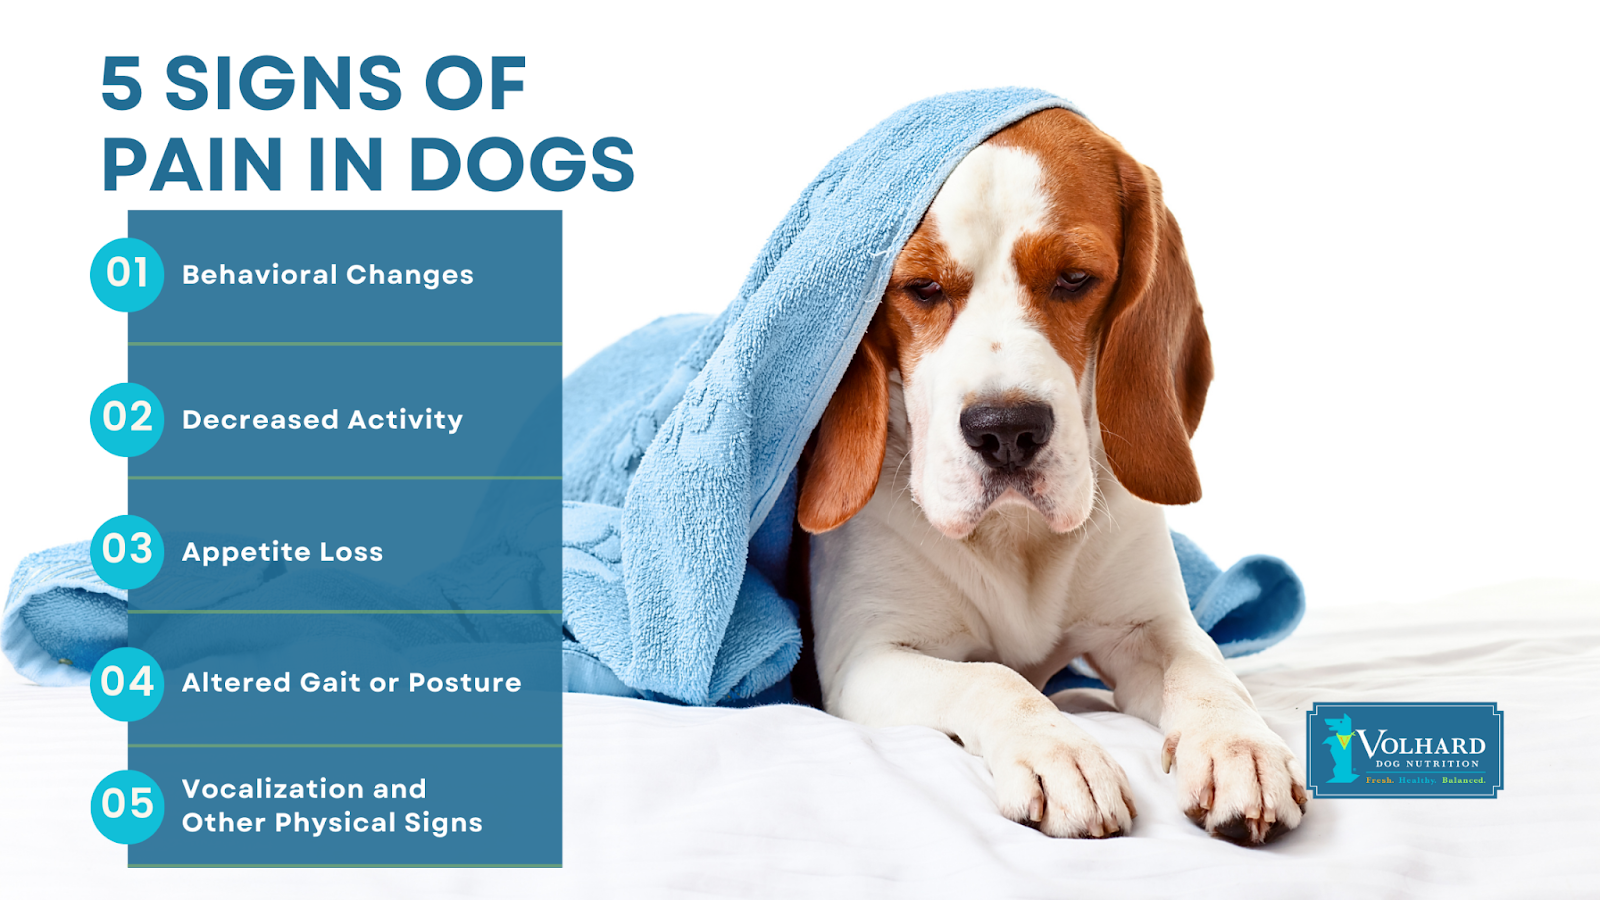 5 signs of pain in dogs